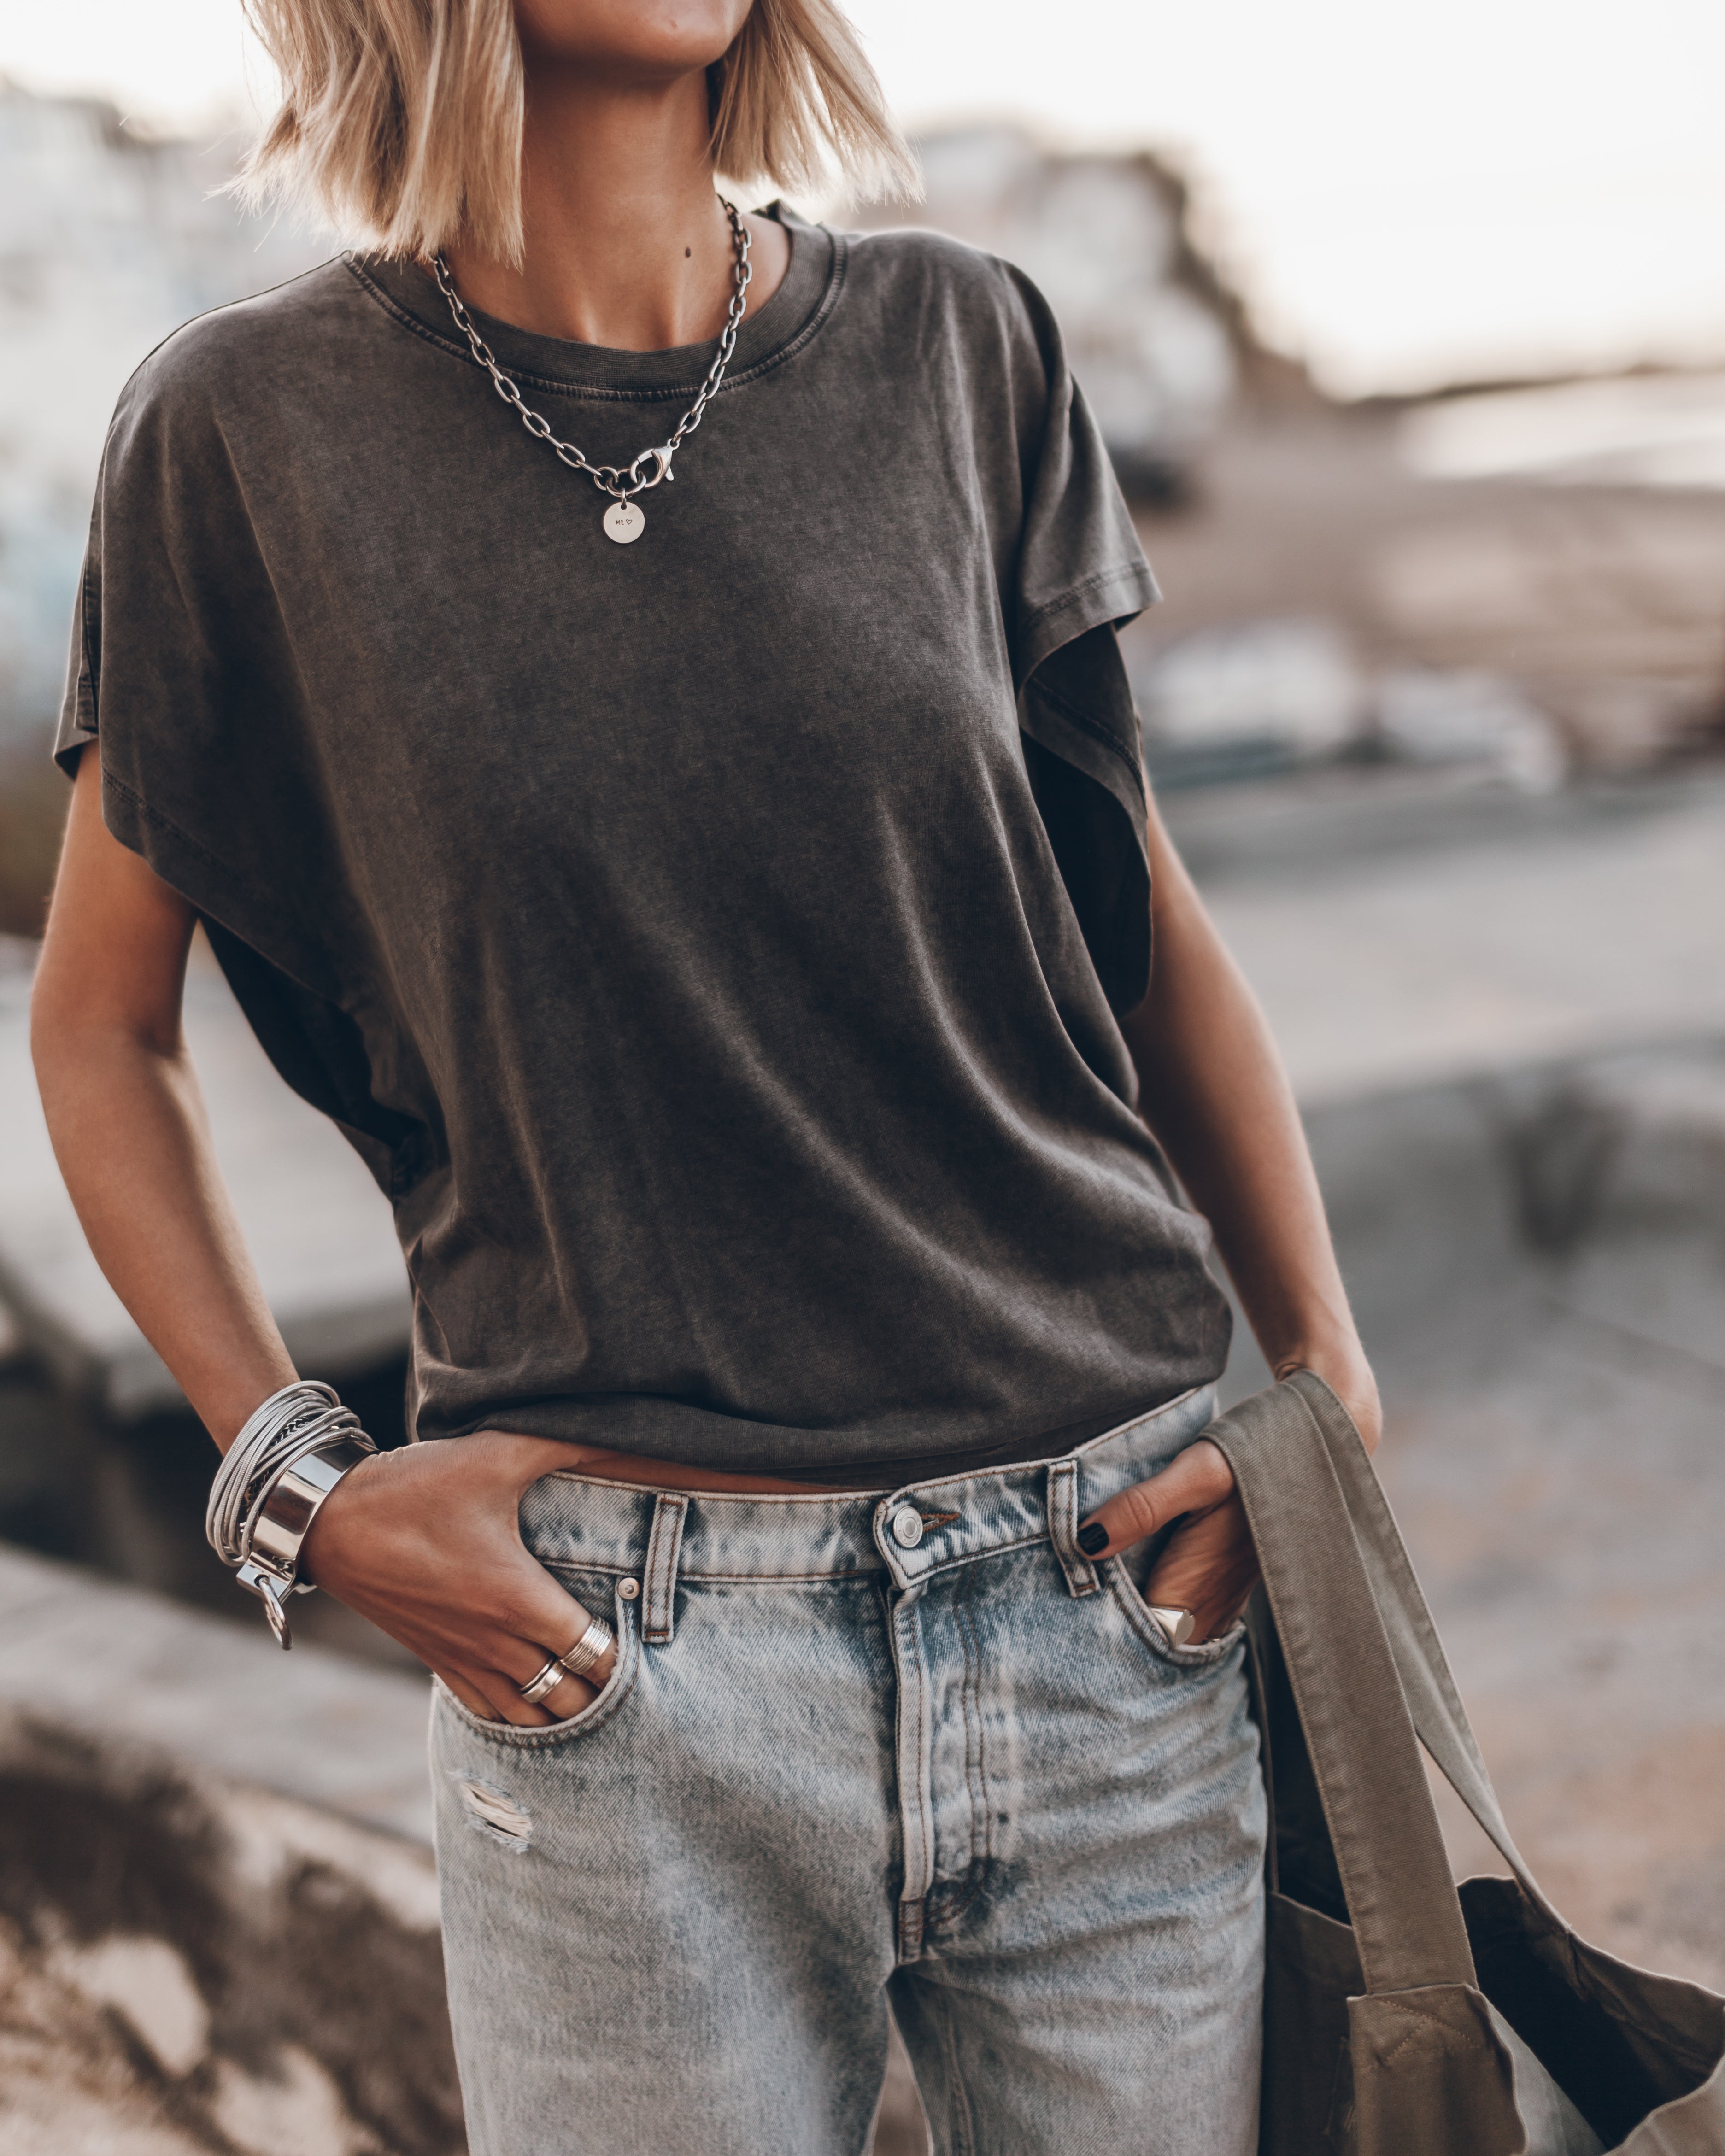 The Dark Faded Batwing T-Shirt